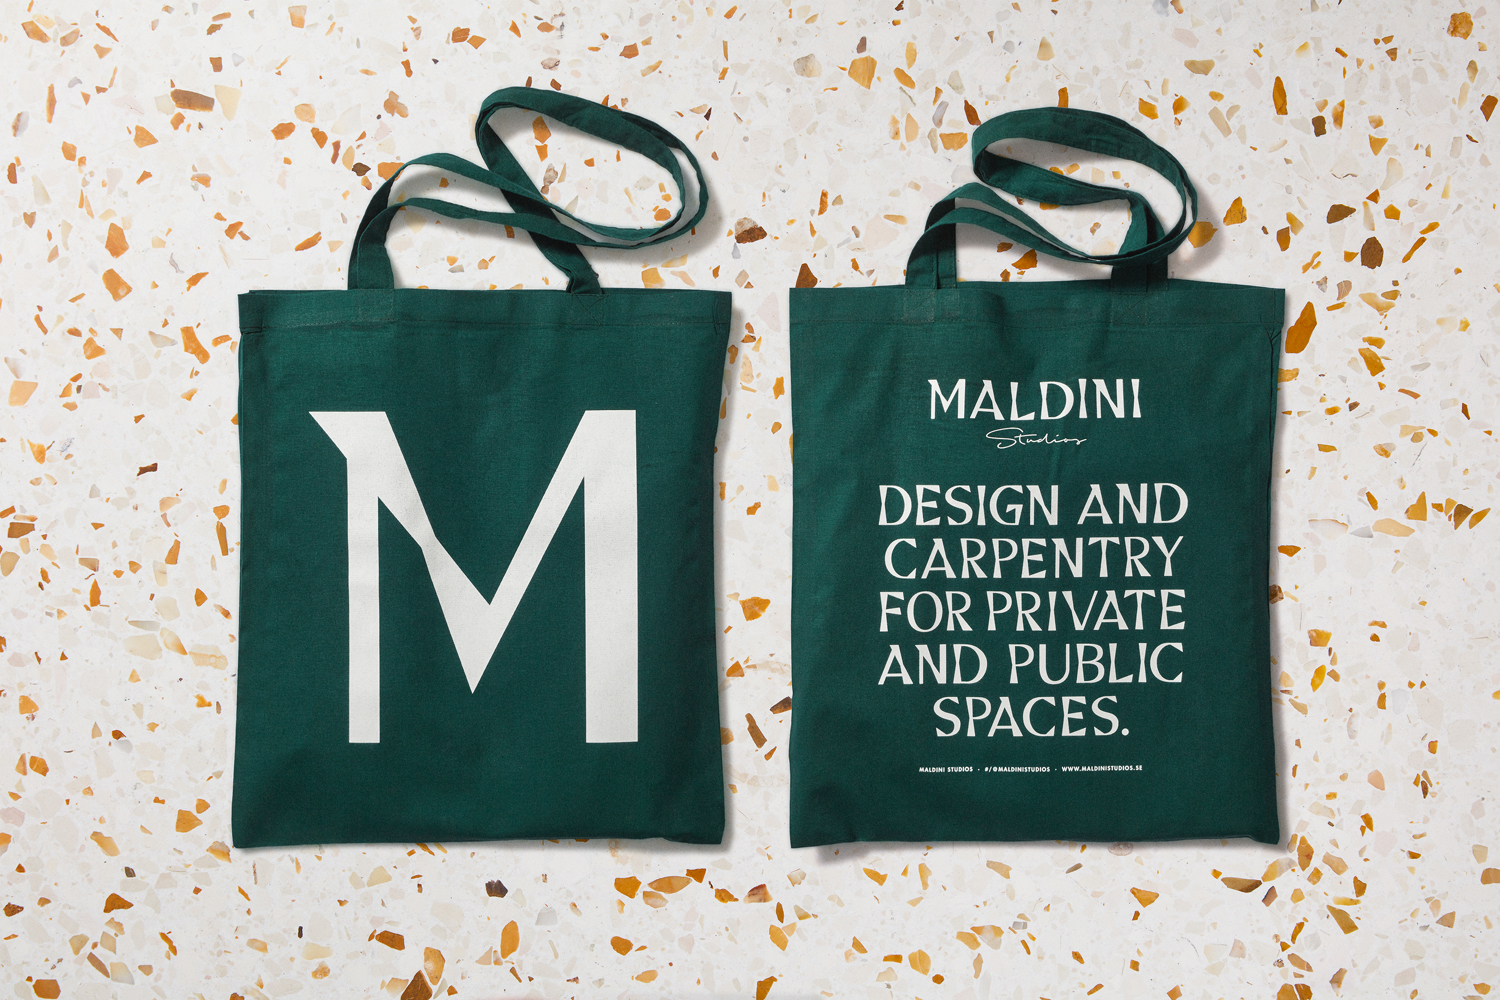 Graphic identity, custom typeface and branded tote bag by Jens Nilsson for interior design and carpentry business Maldini Studios